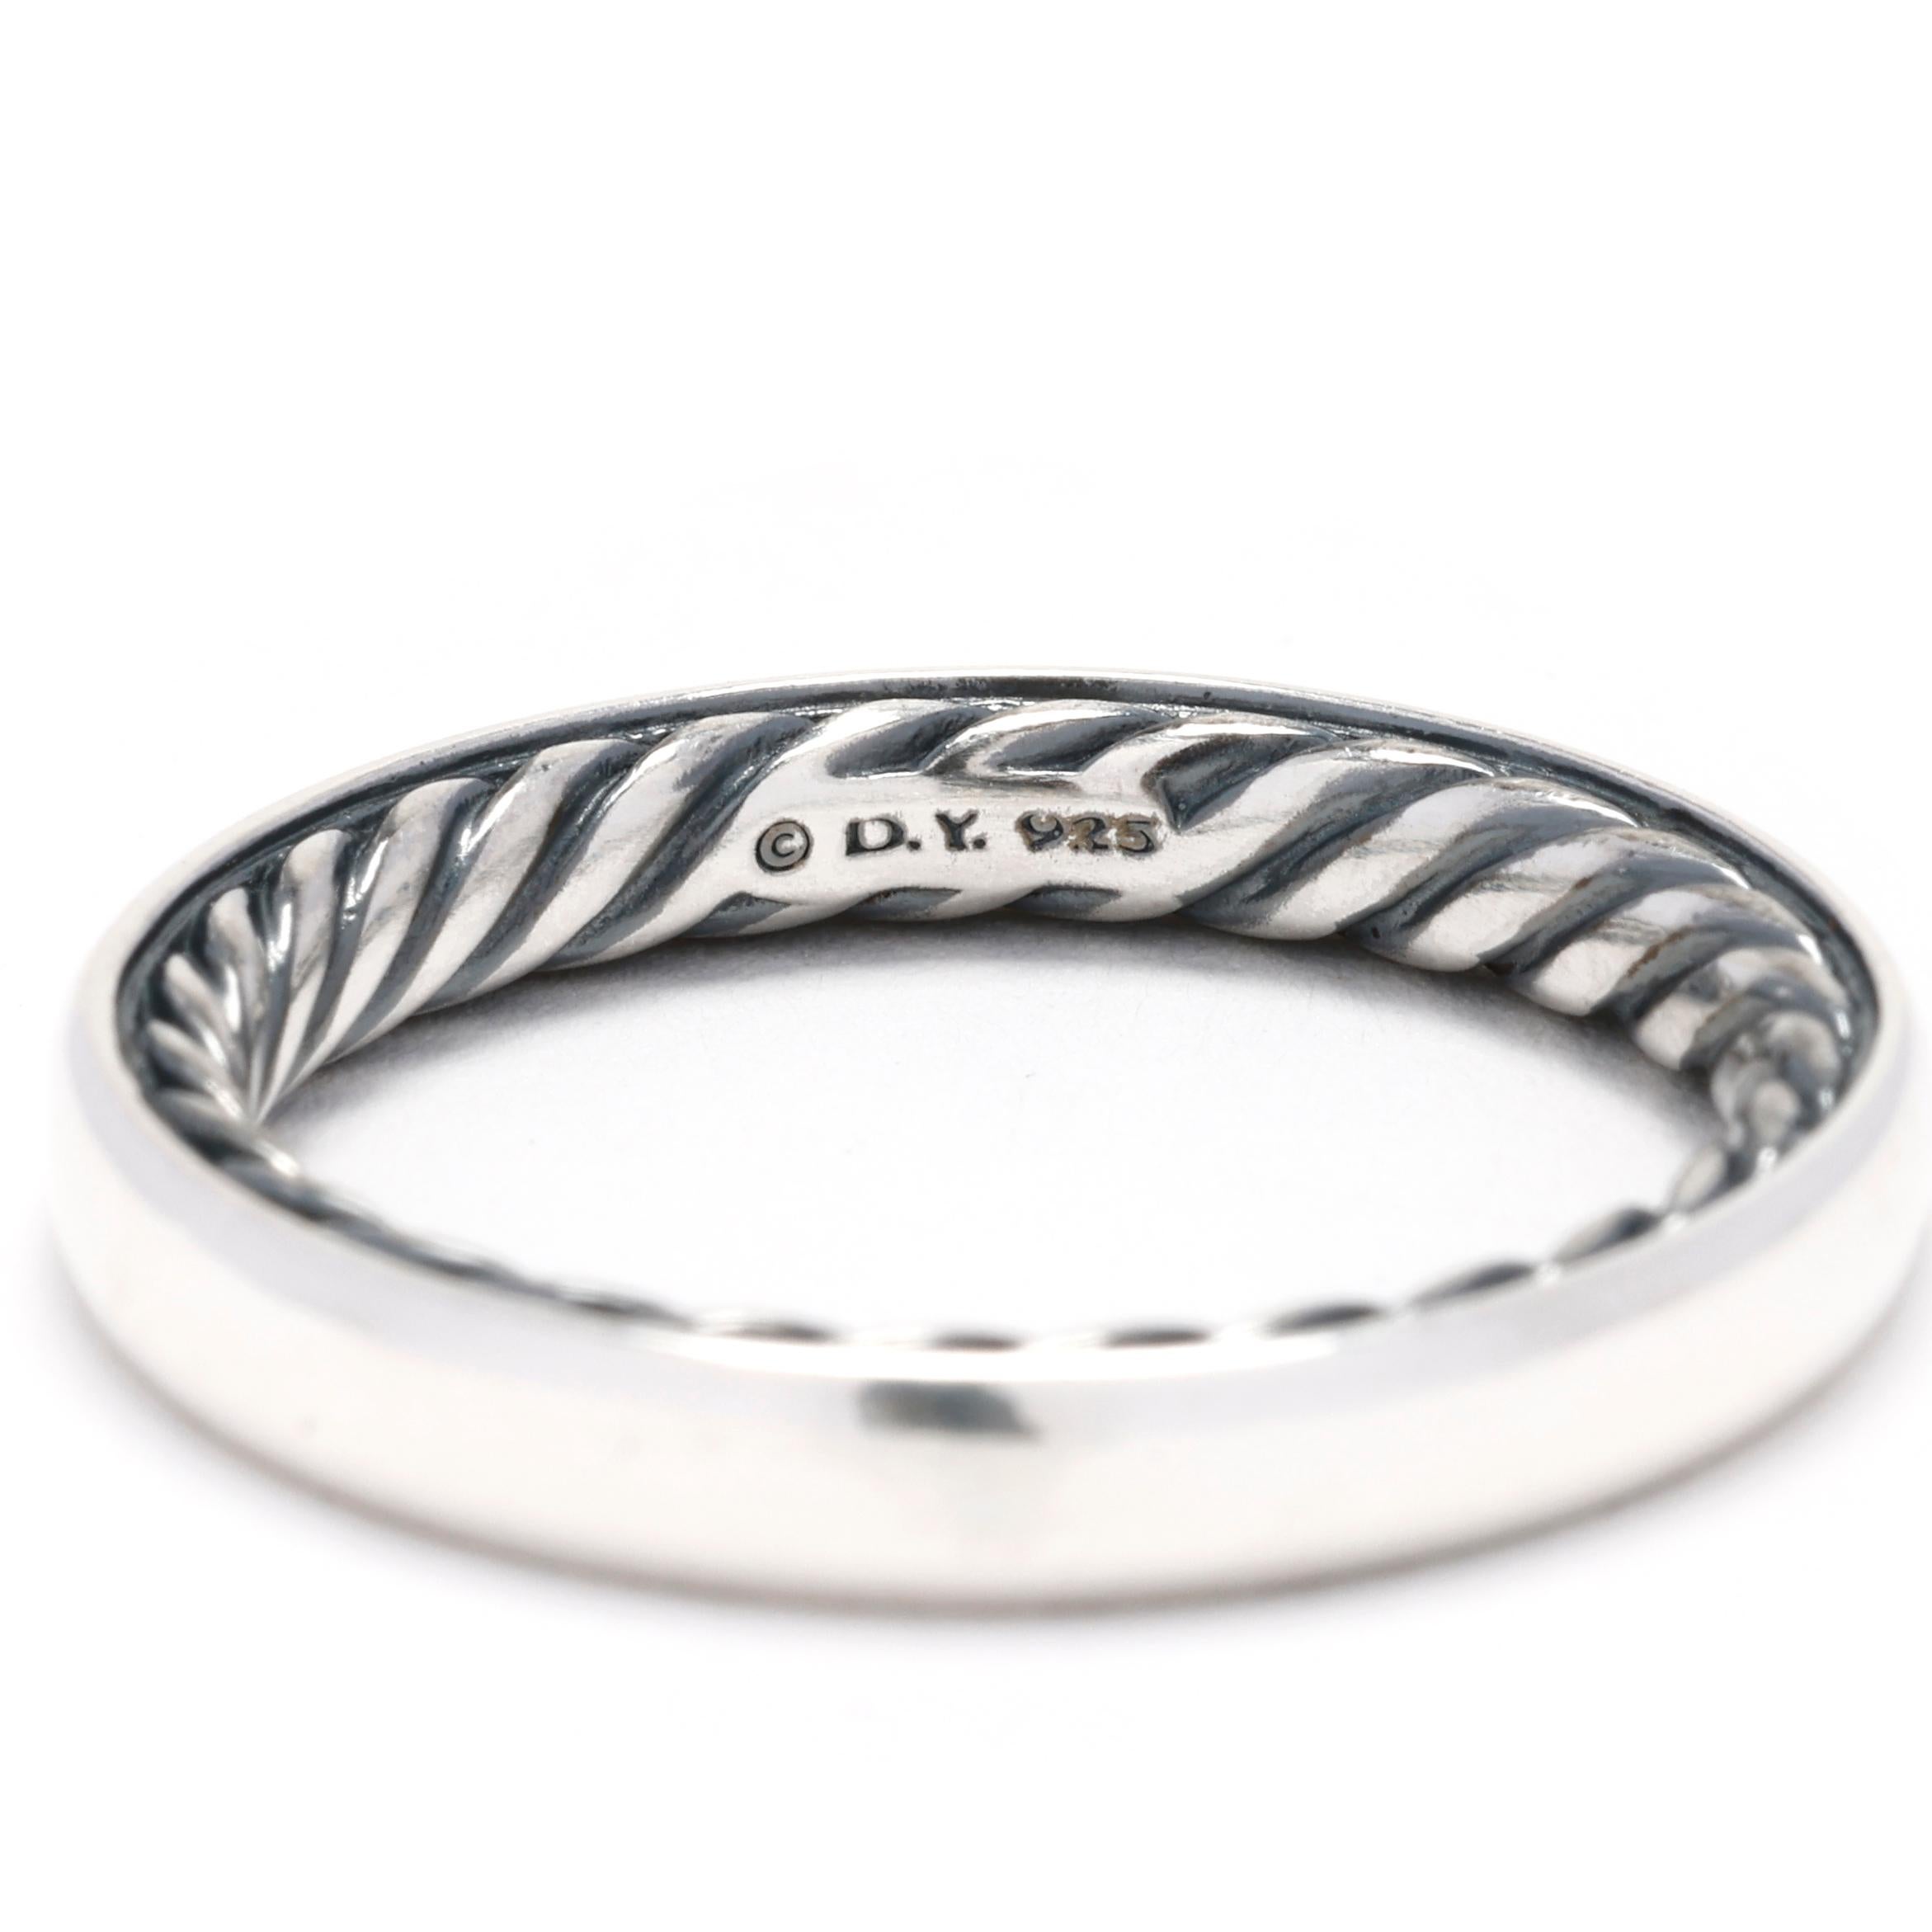 Embrace the timeless elegance and distinctive design of David Yurman with this stunning Sterling Silver Band Ring. Expertly crafted in high-quality sterling silver, this classic band ring features an inner twisted design that adds a unique and